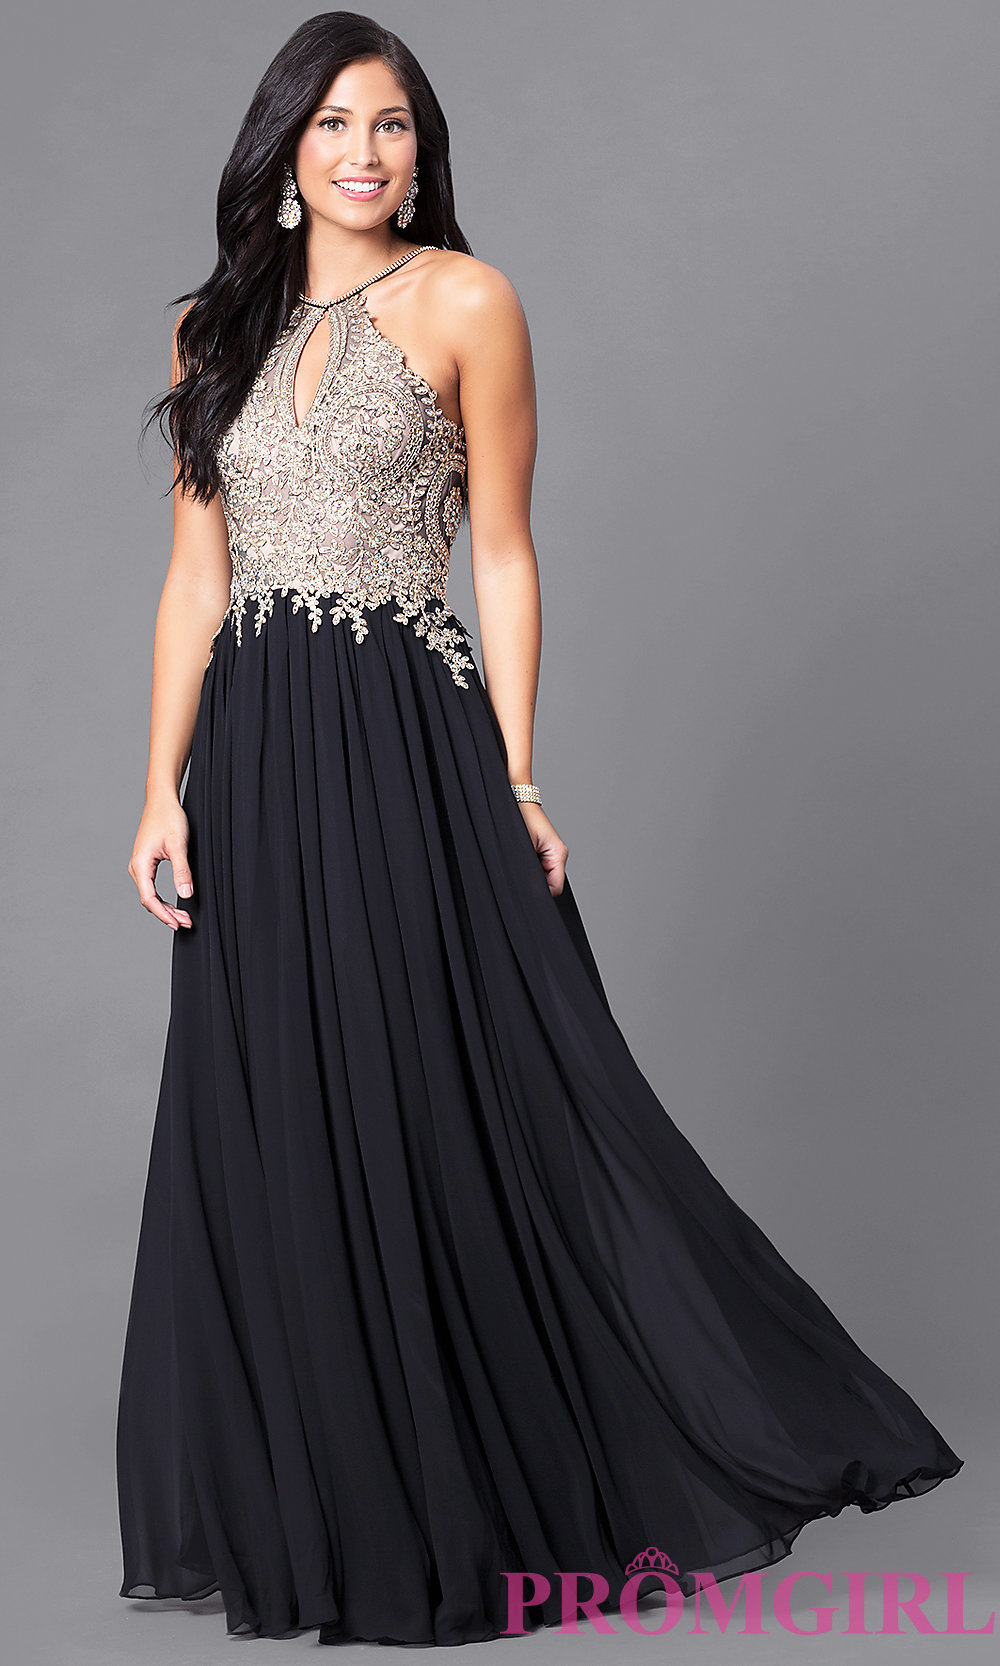 black prom dresses hover to zoom KVAUWYS